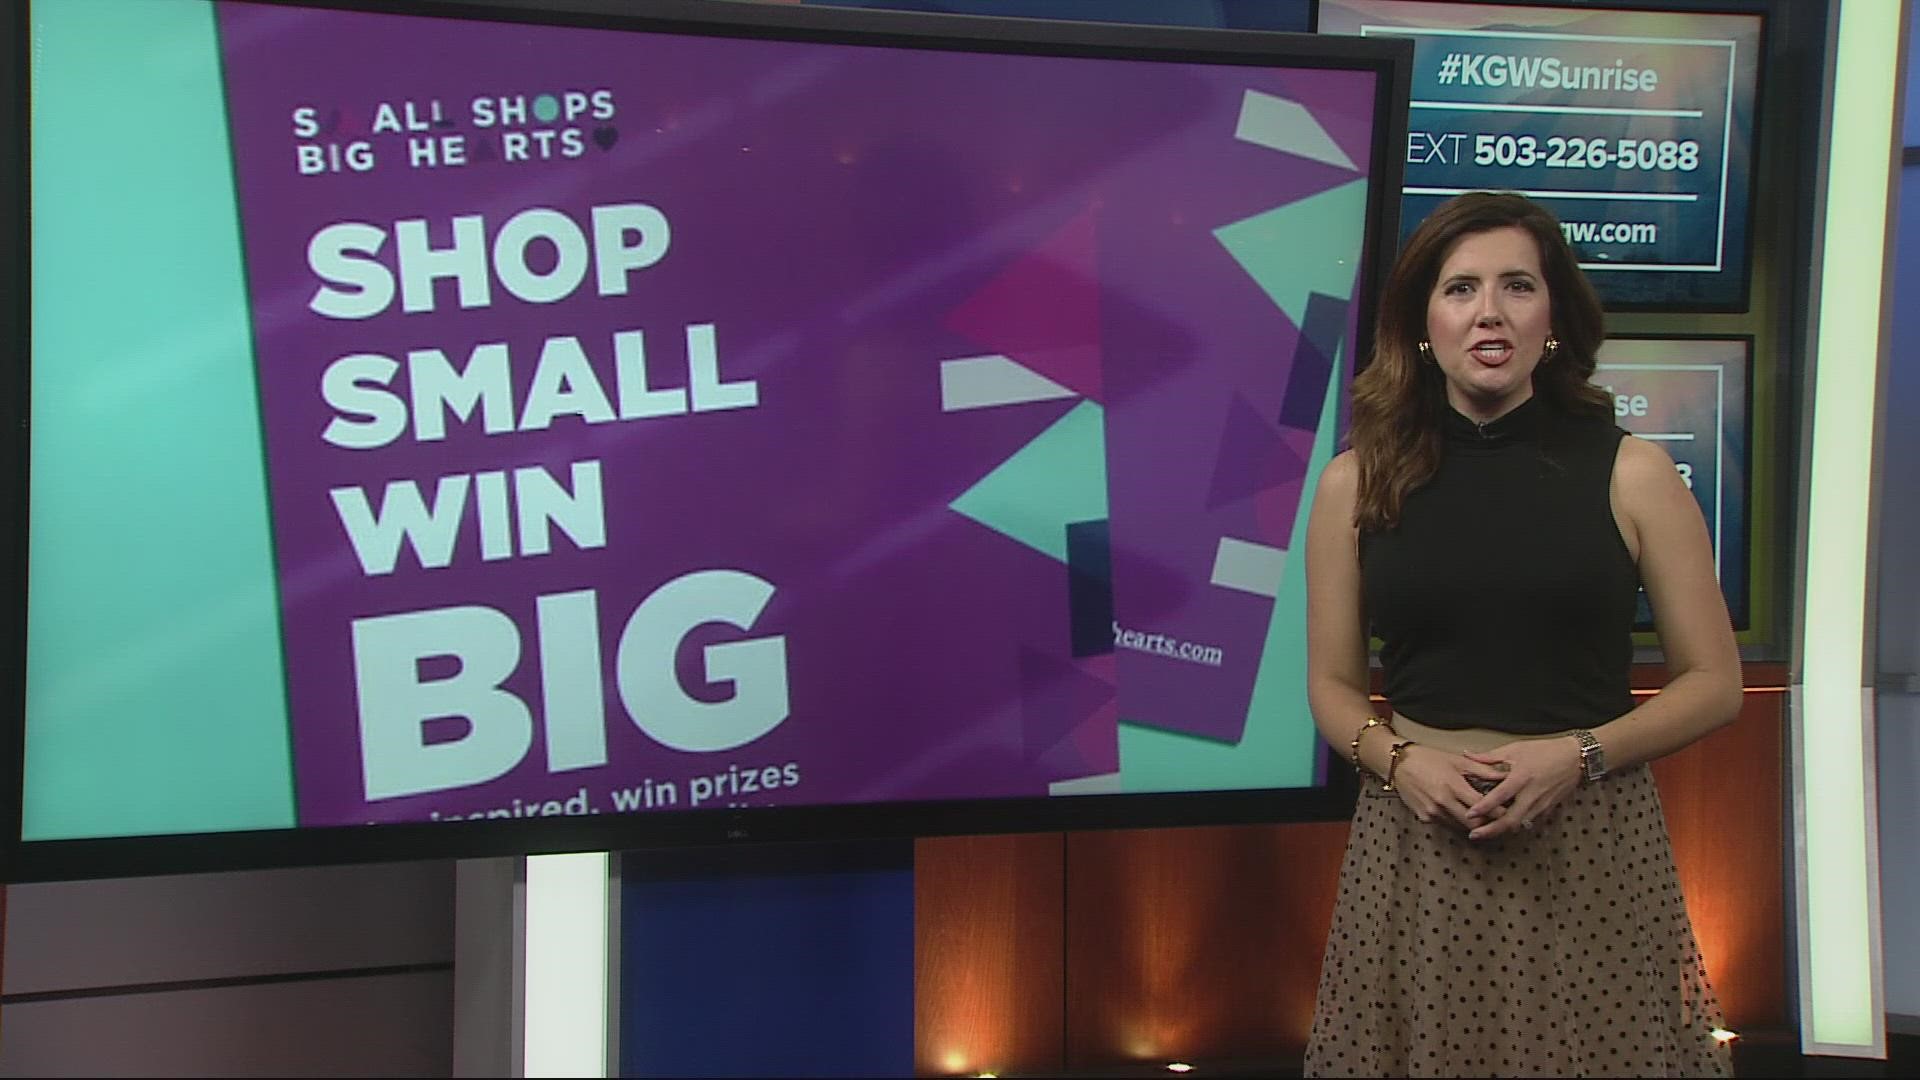 Small Shops Big Hearts is a campaign to expand what's known as Small Business Saturday. Thanks to a locally-made phone app, you can win stuff while you shop!